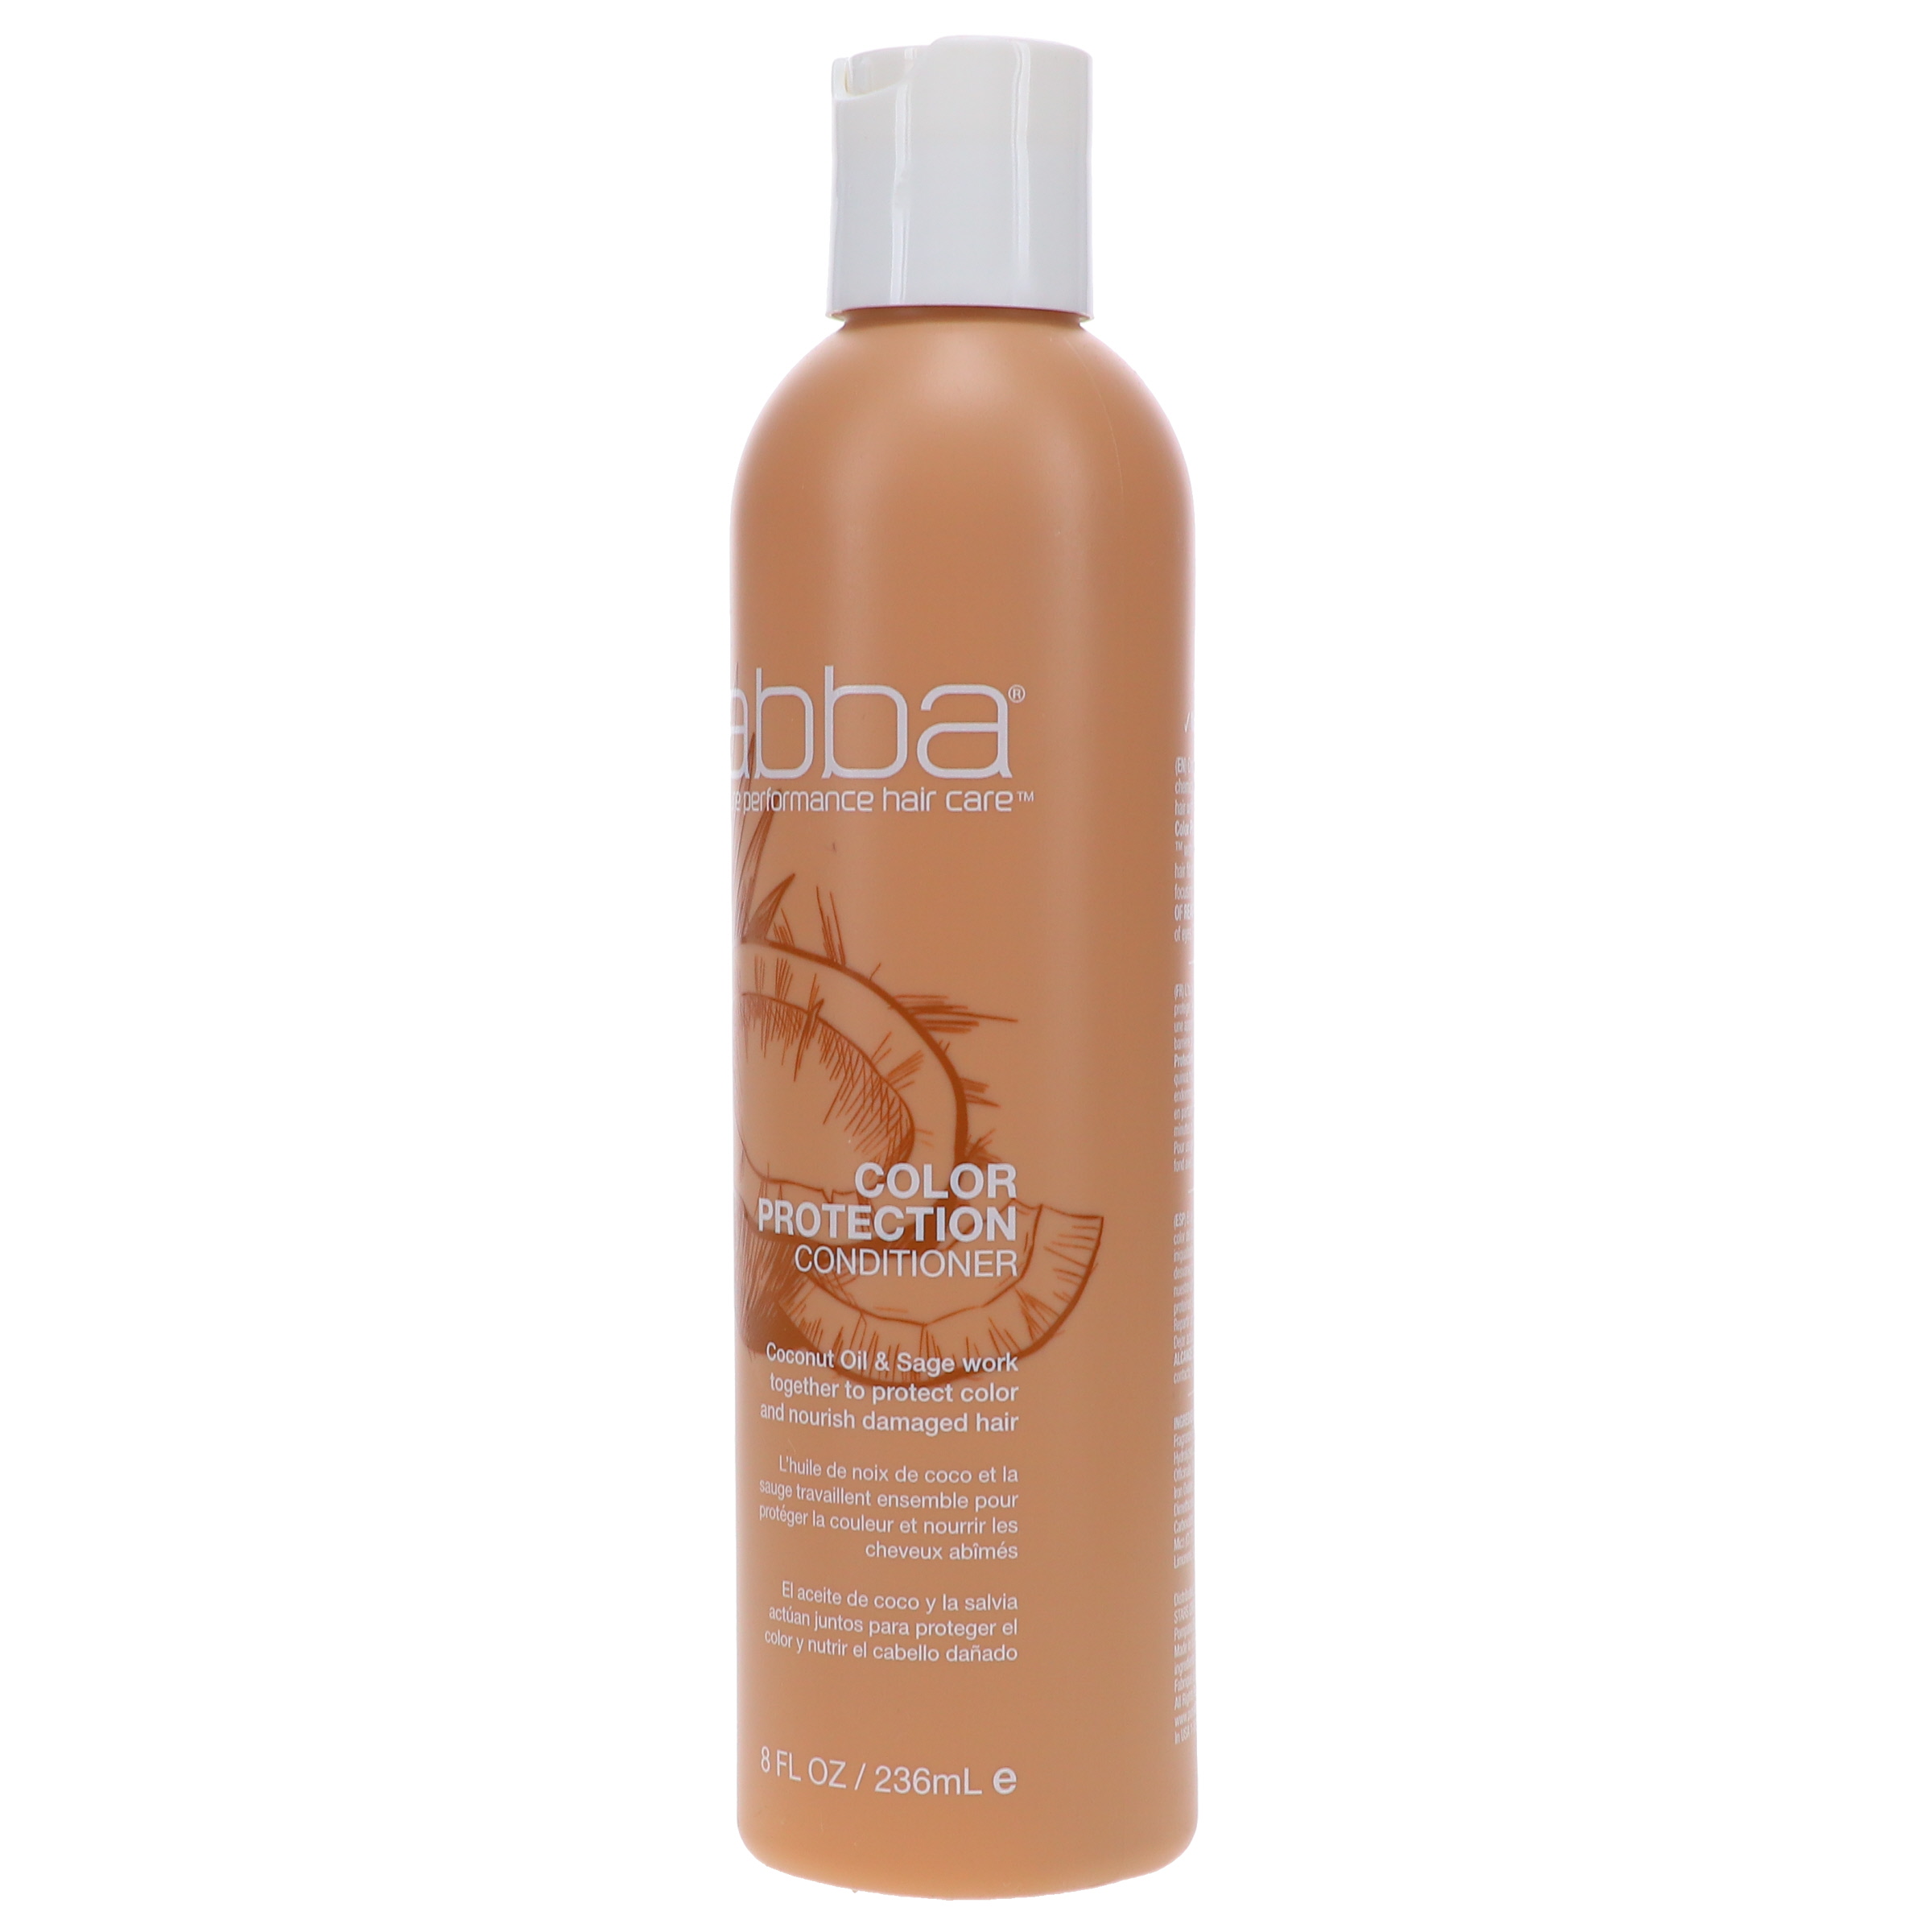 ABBA Color Protection Conditioner 8 oz - image 2 of 8